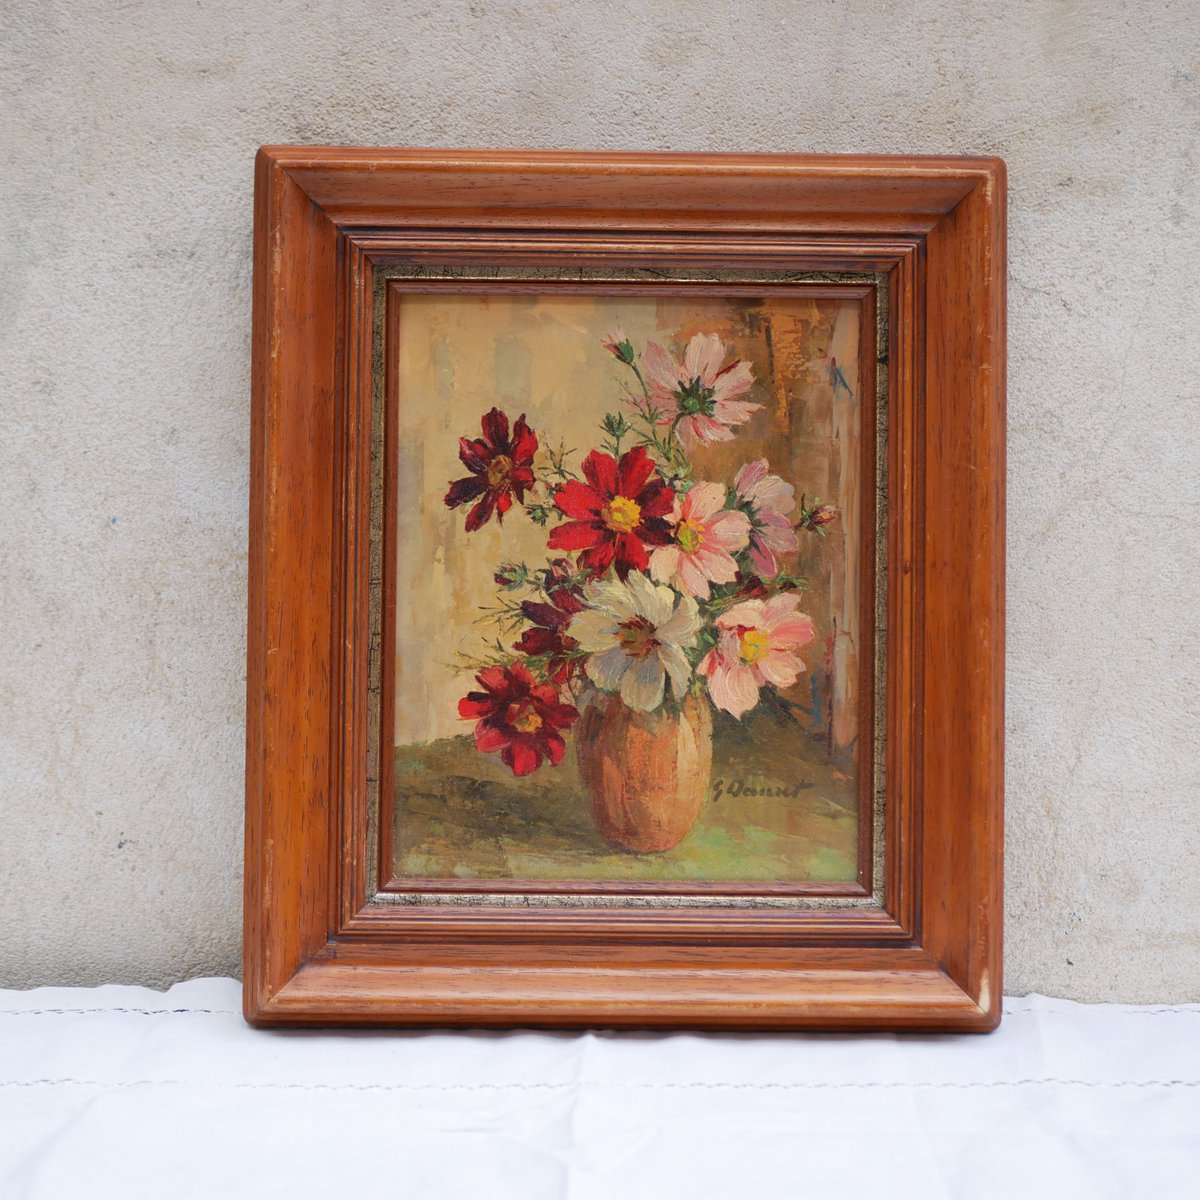 The Catawiki 'Art Crush' auction ends today!  Don't miss out on one of these beautiful floral oil paintings by French artist Georges Danset #catawiki #artcrush #georgesdanset #vintage #antique #HappyBidding #Frenchartist #Roses #Flowers #auction #Frenchart